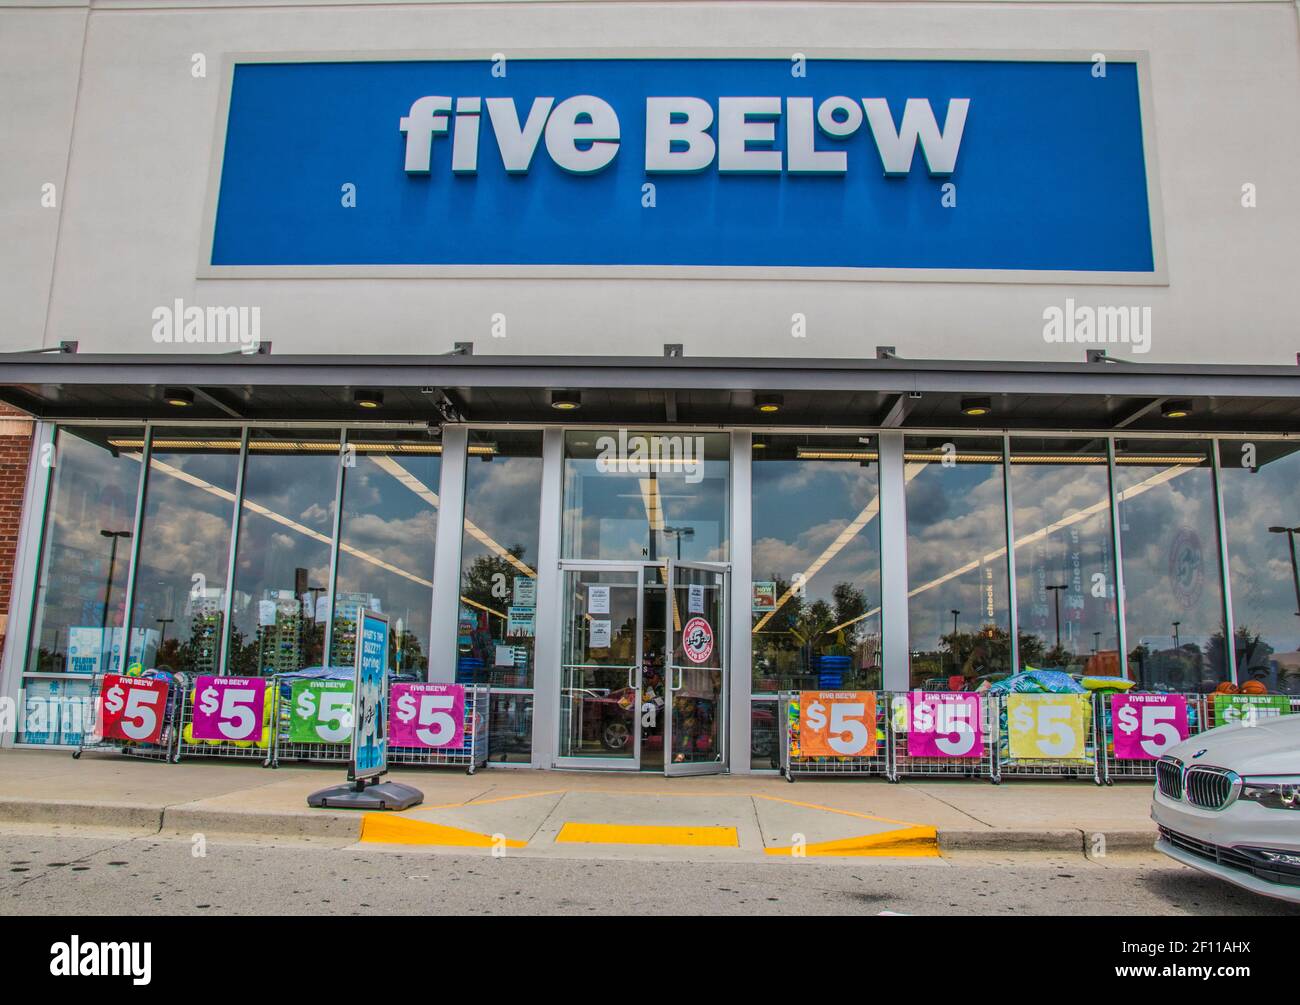 Snellville, Ga / USA - 07 14 20: five below store sign and entrance Stock Photo